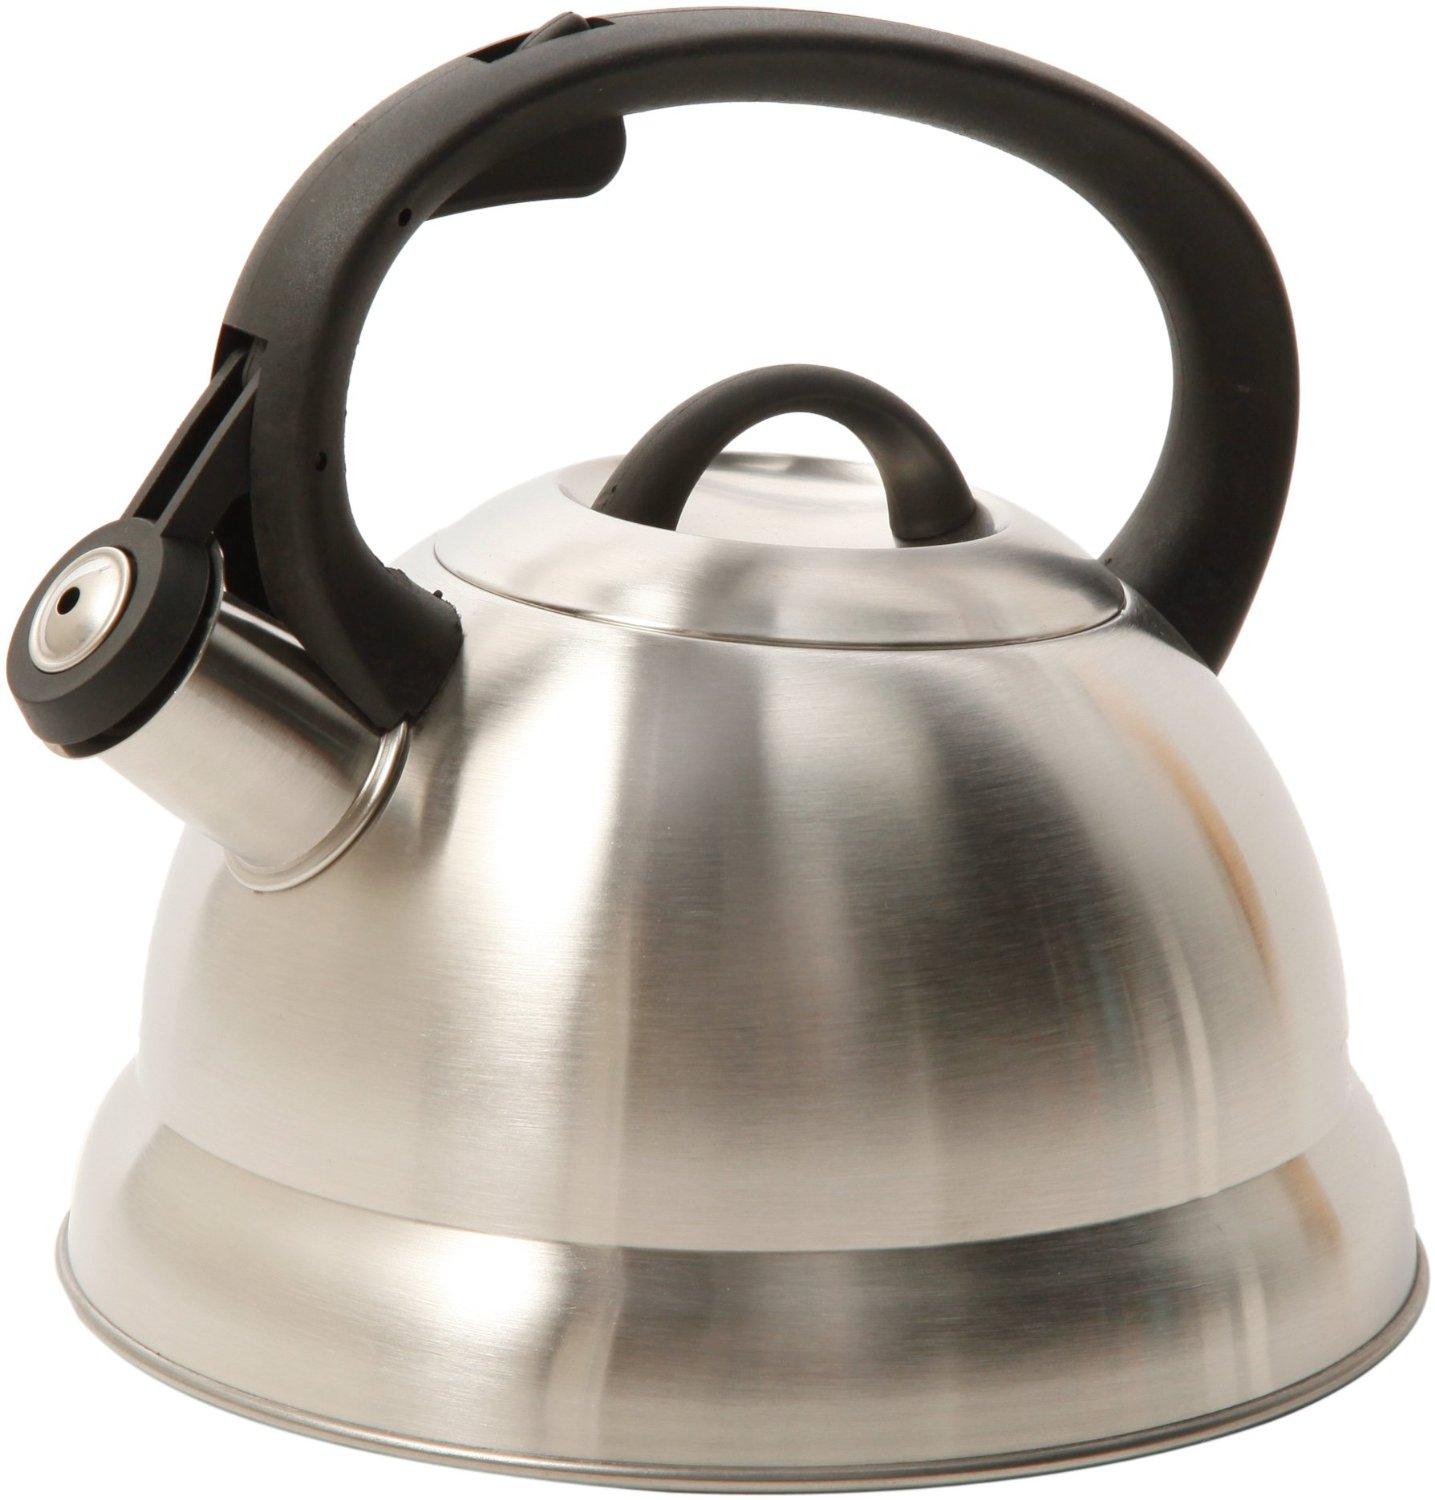 Willow & Everett Whistling Kettle, Tea Pots for Stovetop - Stainless Steel  Teapot with Infuser for Loose Leaf Tea, 2.75 Liters